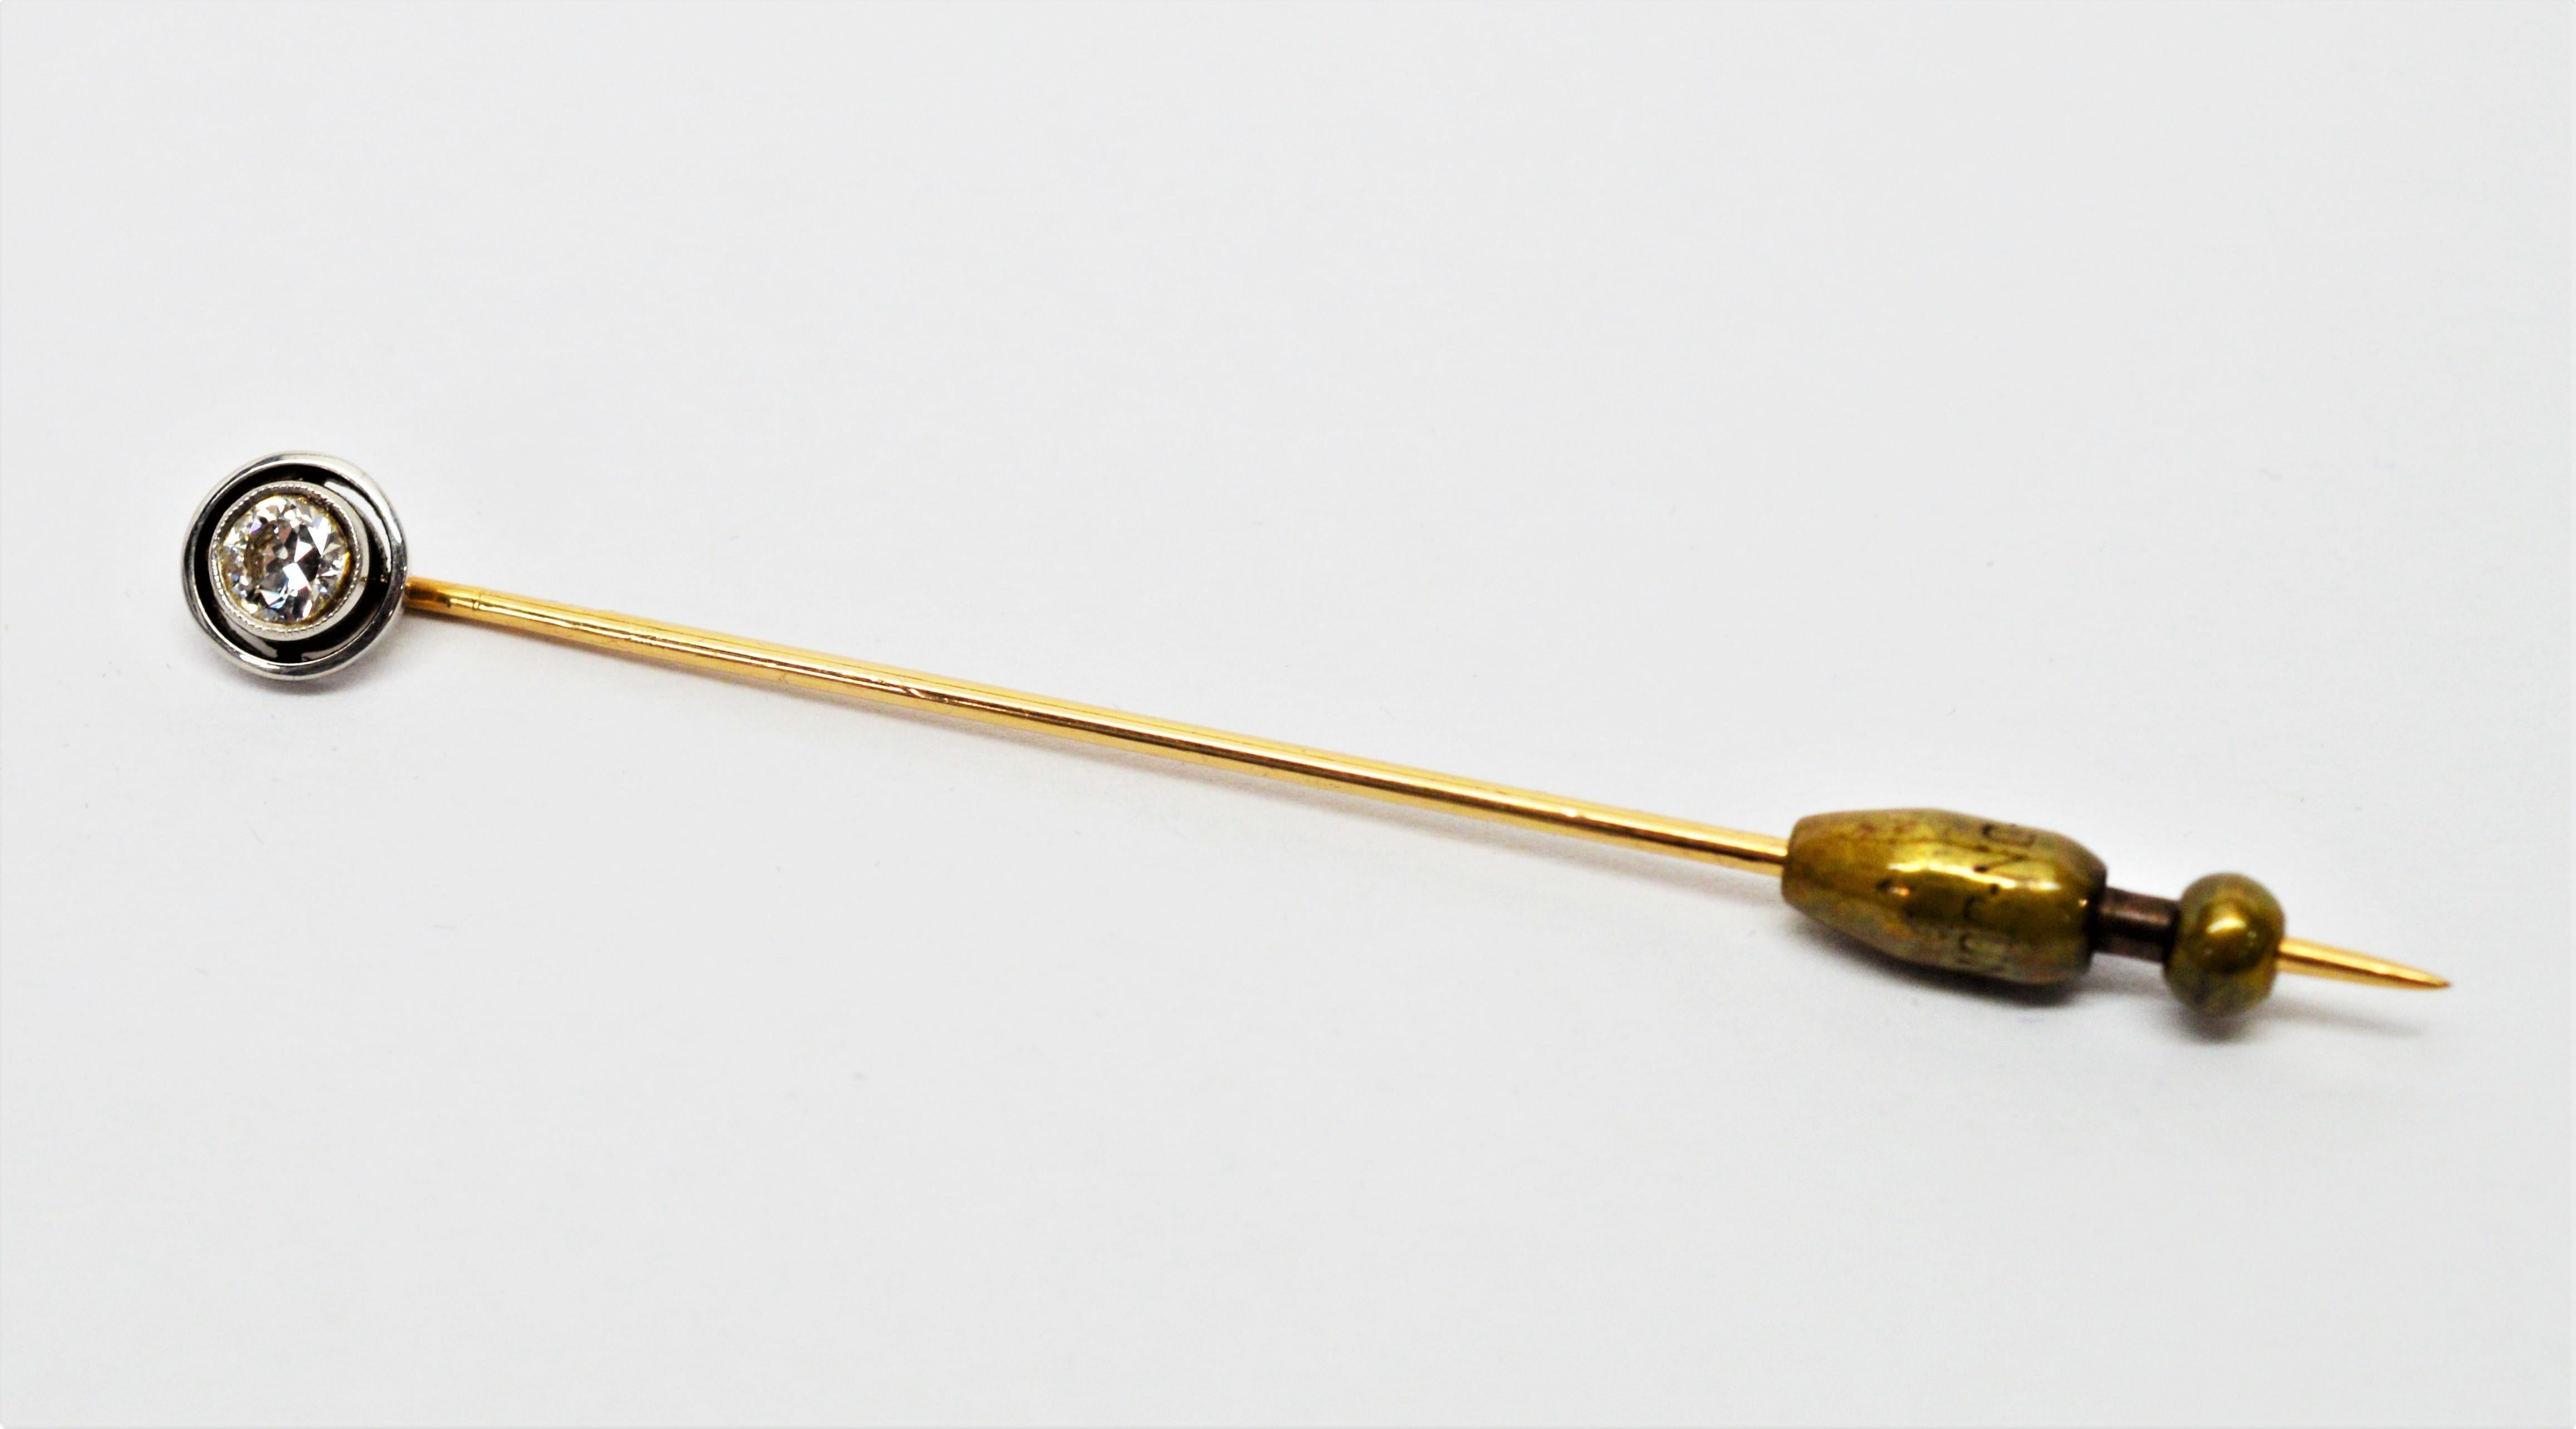 In it's original purple velvet box from Lambert Bros. New York and signed, this fourteen carat yellow gold antique stick pin with .30 carat miner's cut diamond H/VS is delicately framed in white platinum with a black enamel rim is the height of